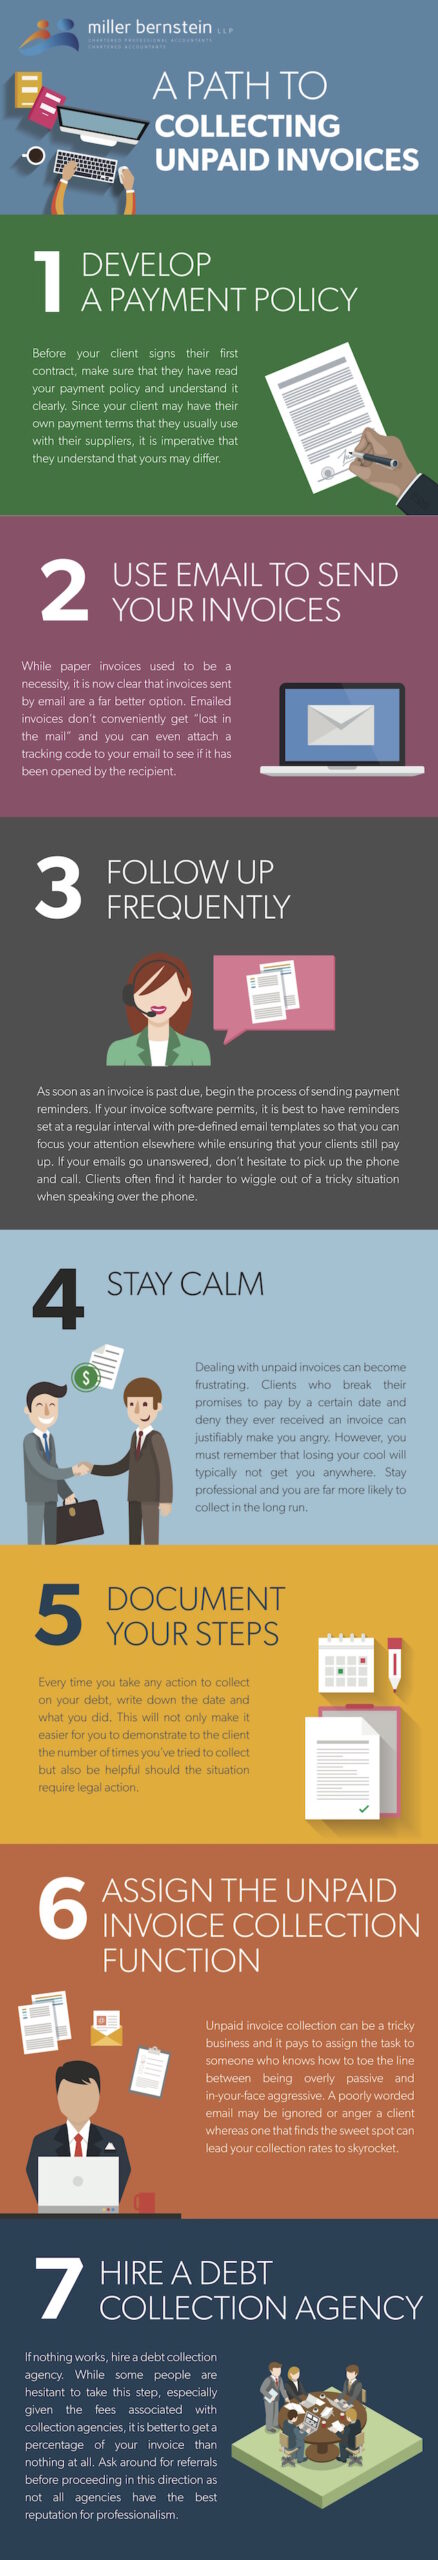 A Path to Collecting Unpaid Invoices Infographic